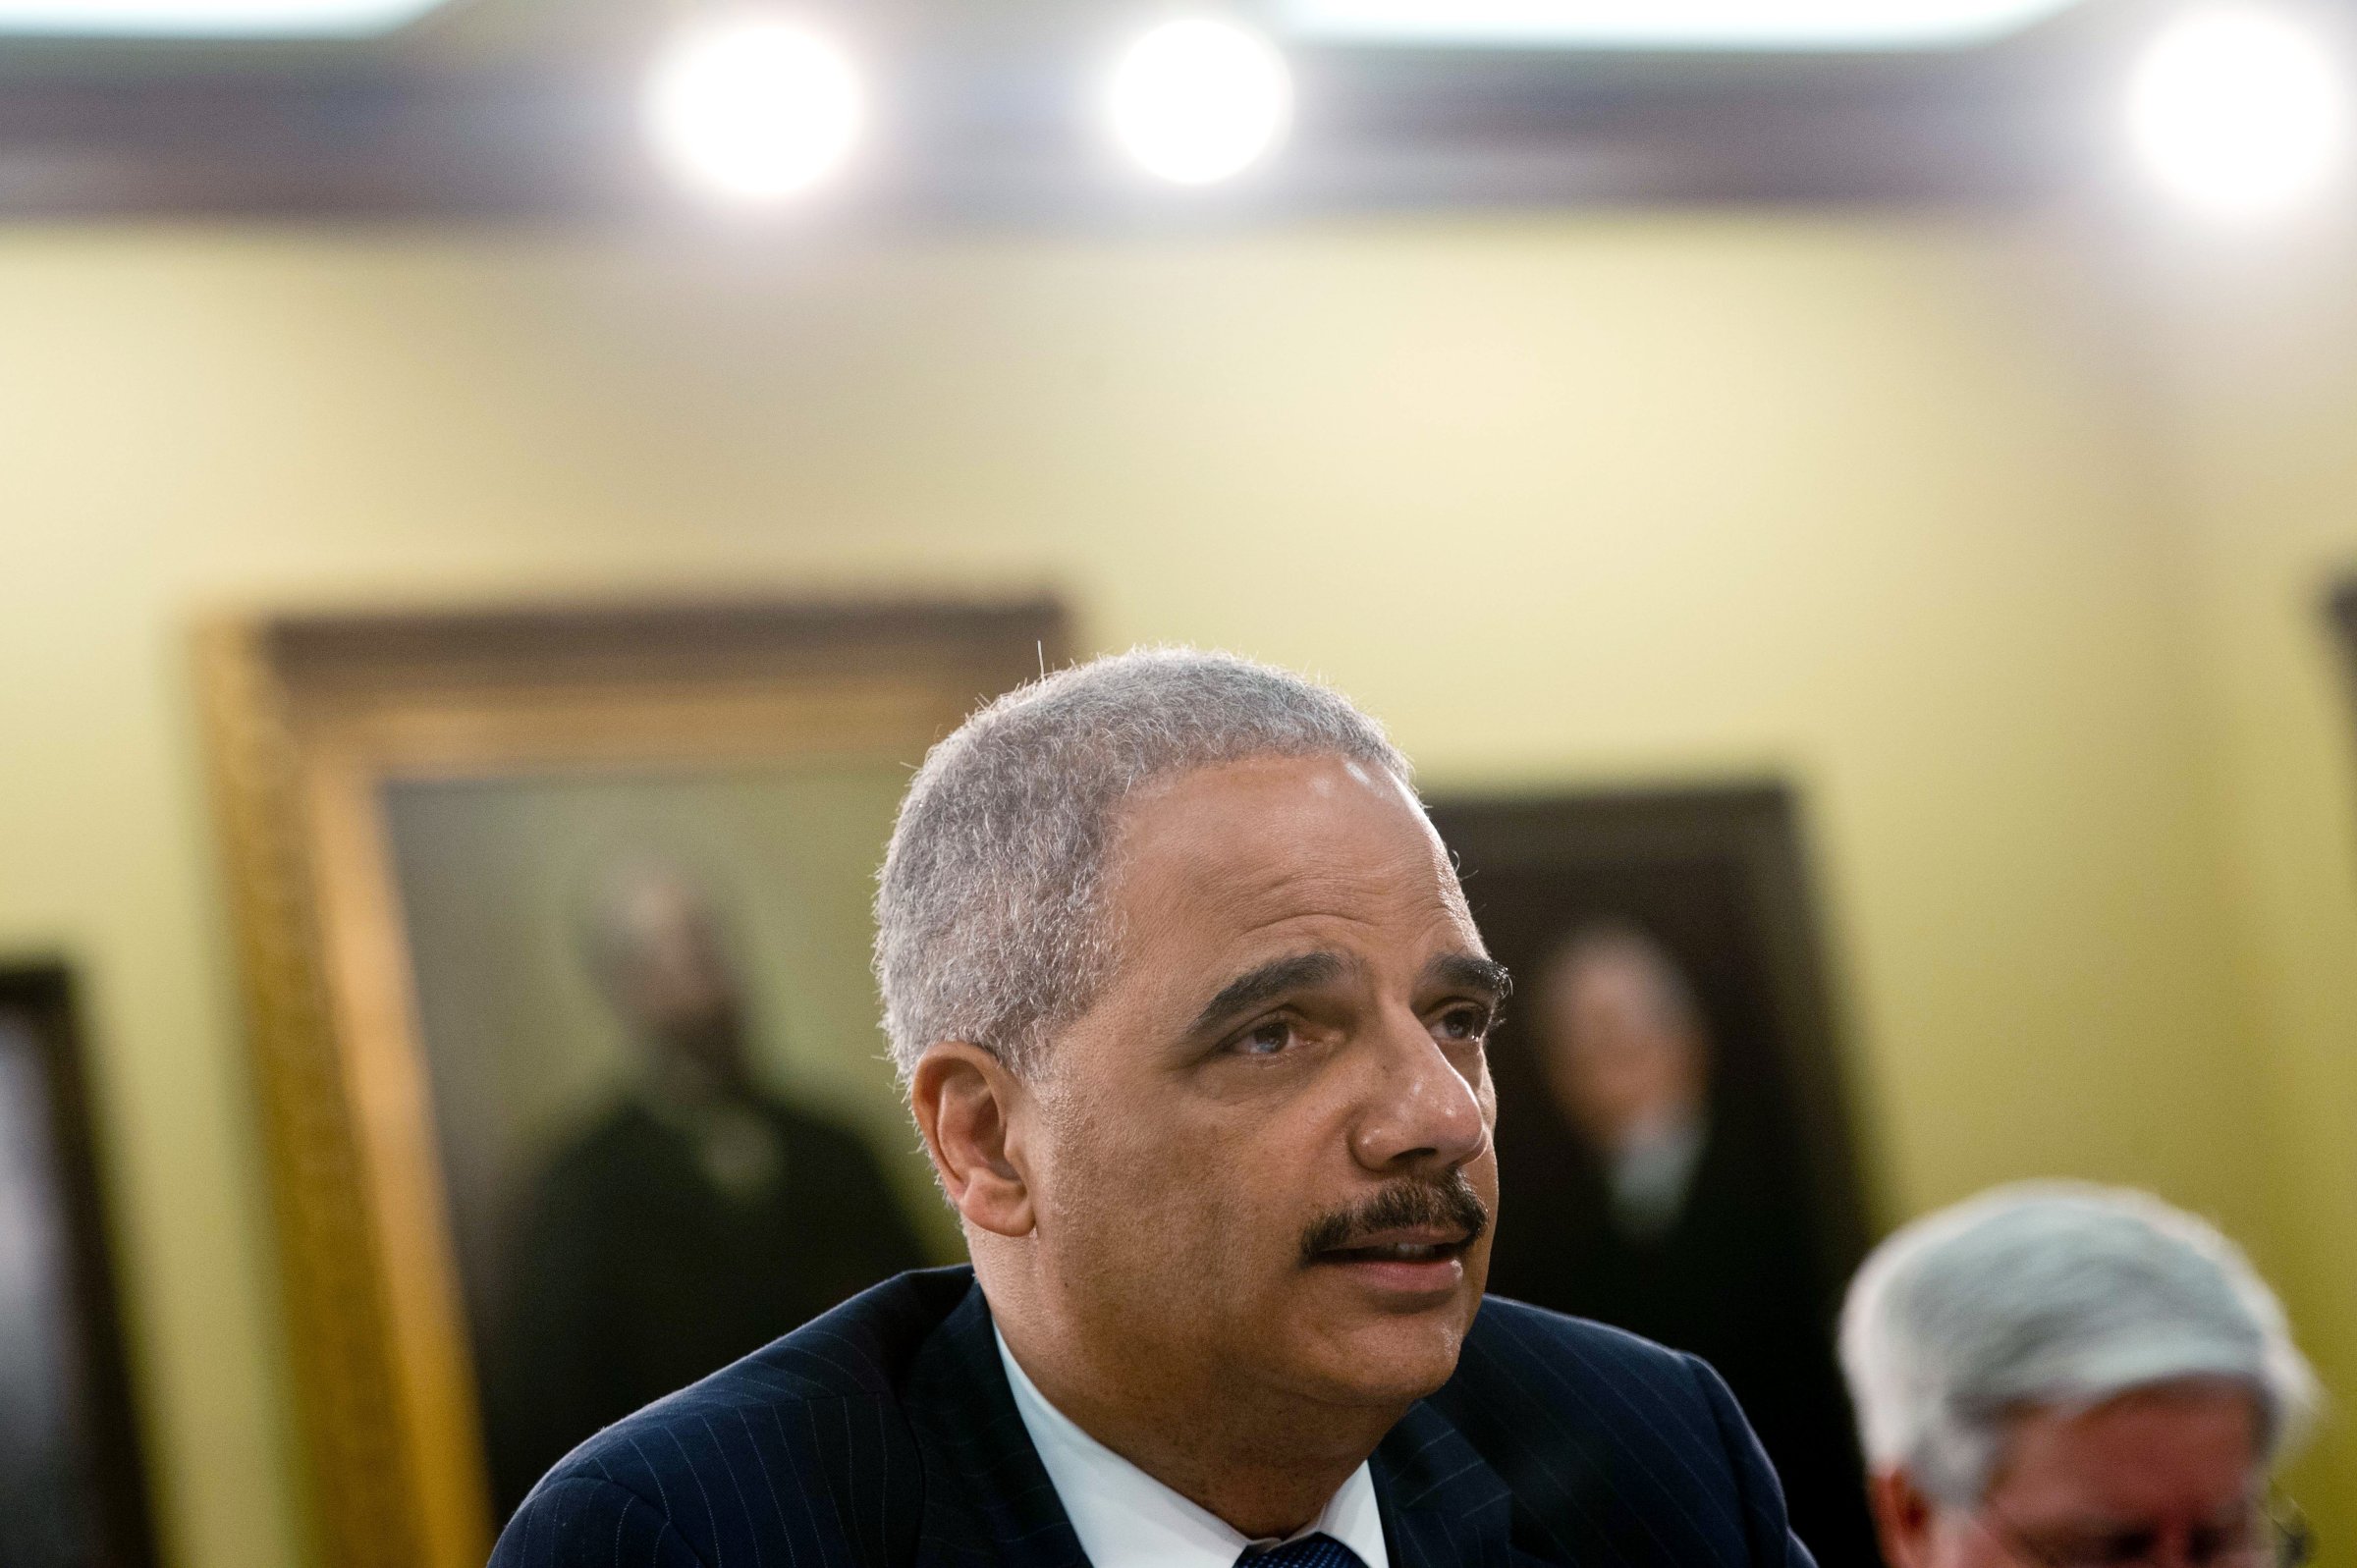 U.S. Attorney General Eric Holder testifies before a House Appropriations Committee Commerce, Justice, Science, and Related Agencies Subcommittee hearing on the Justice Department's fiscal year 2015 budget request on Capitol Hill in Washington, D.C. on April 4, 2014.